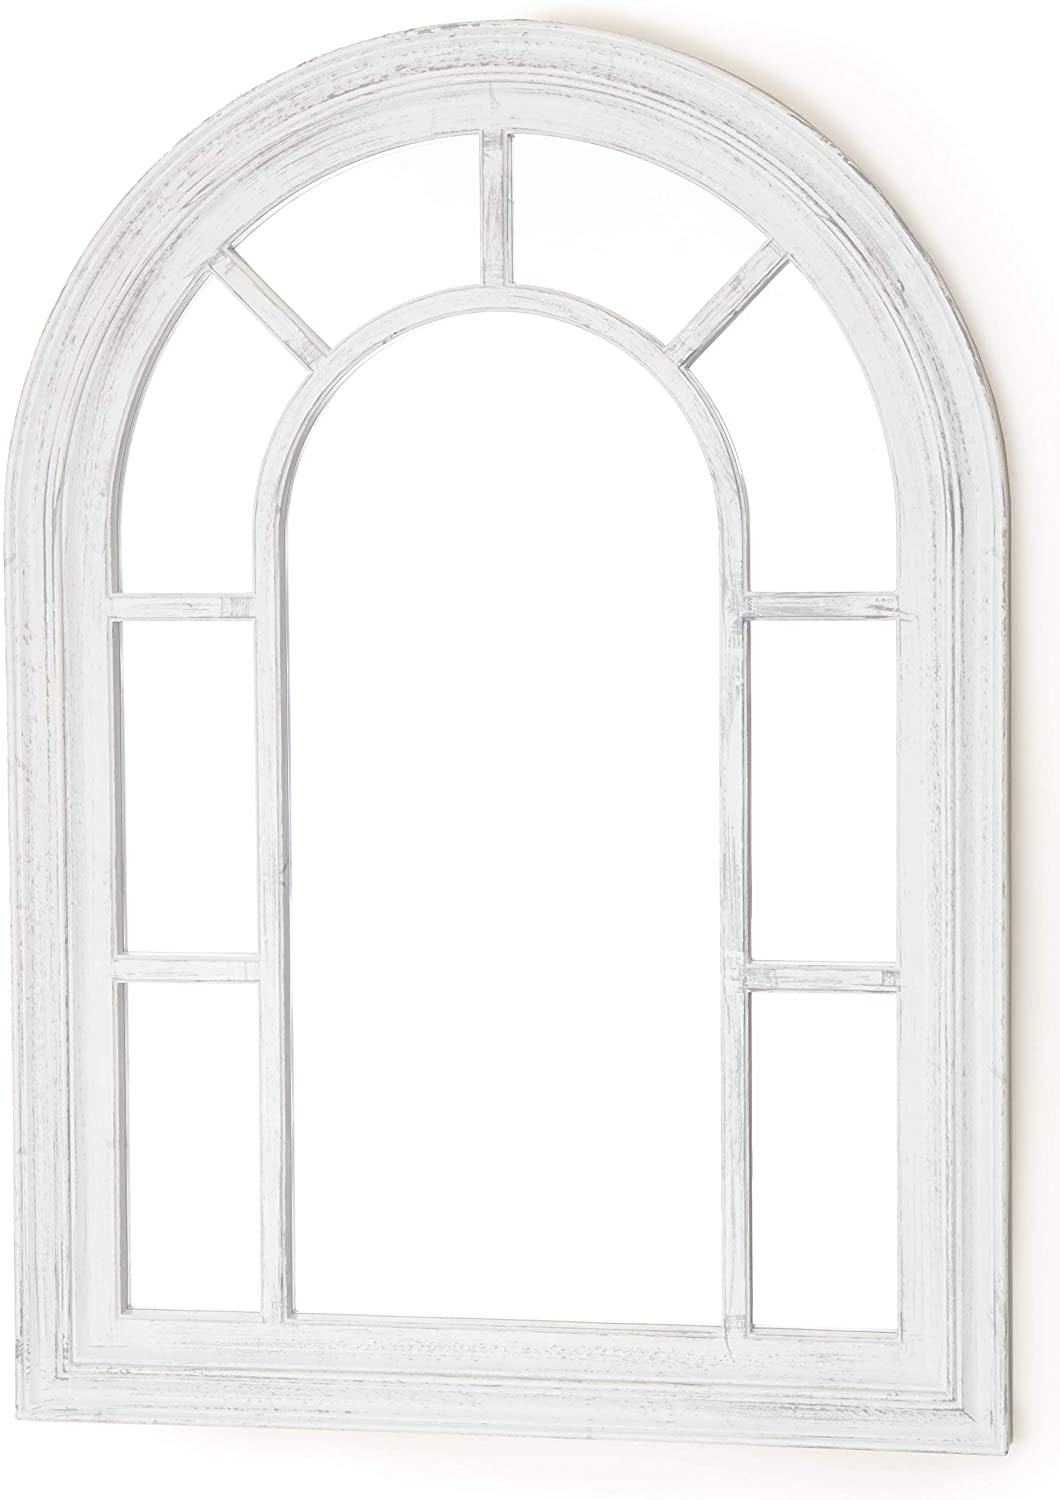 2ft 6in x 1ft 8in Florence Wall Mirror by Creekwood™